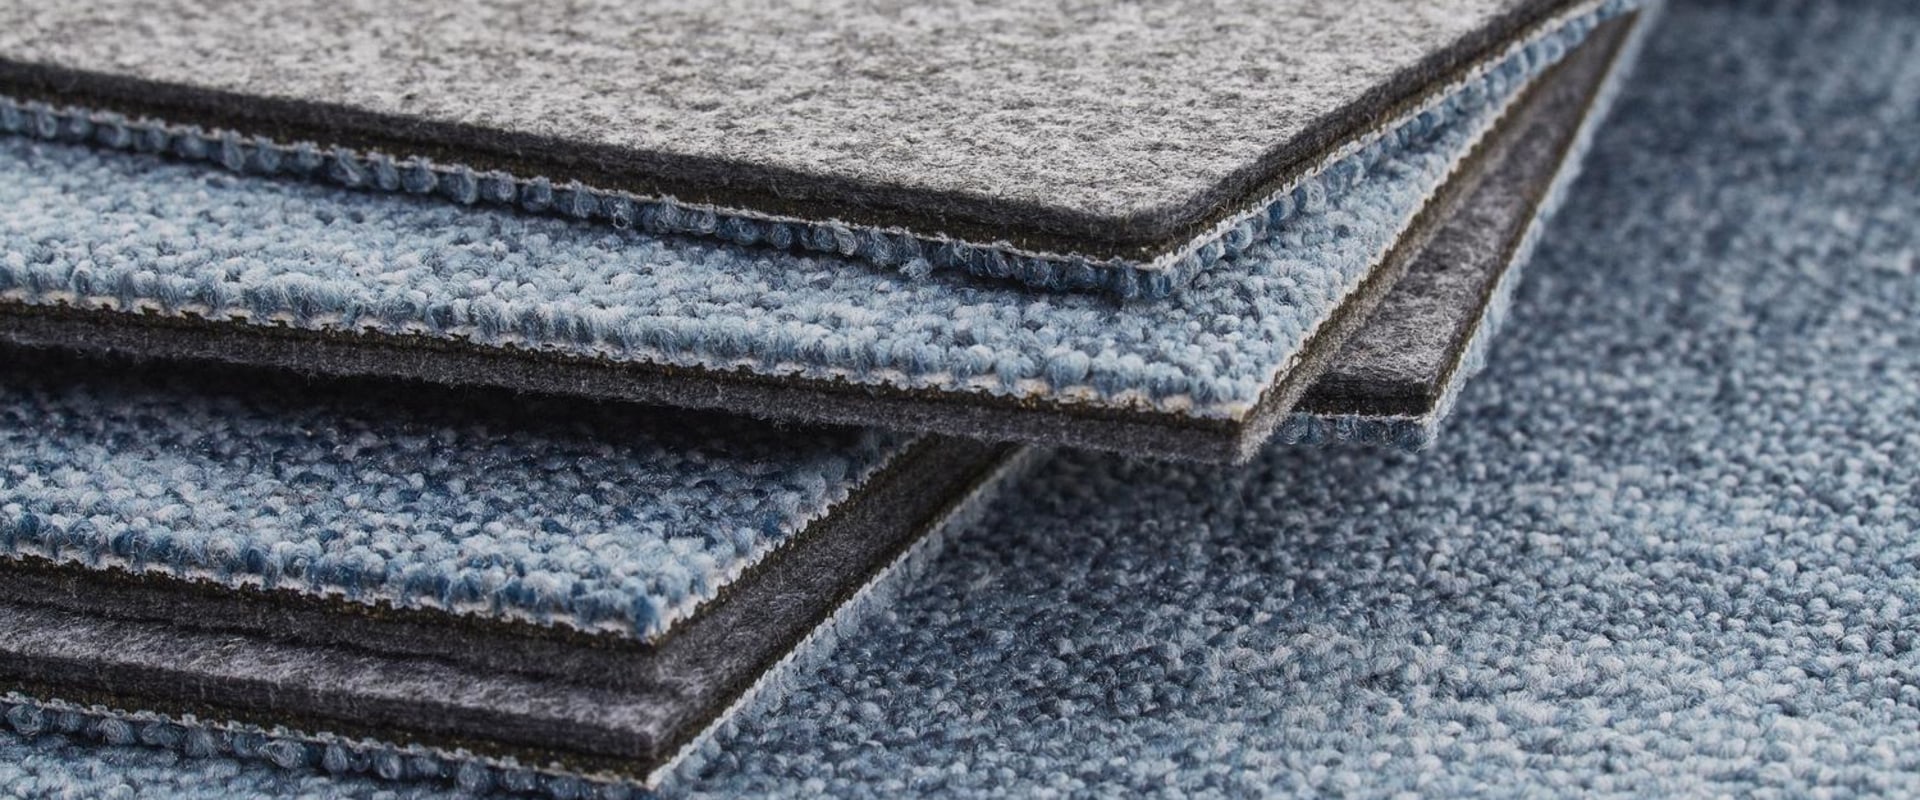 Debunking the Myth of Carpet Underlay For Soundproofing